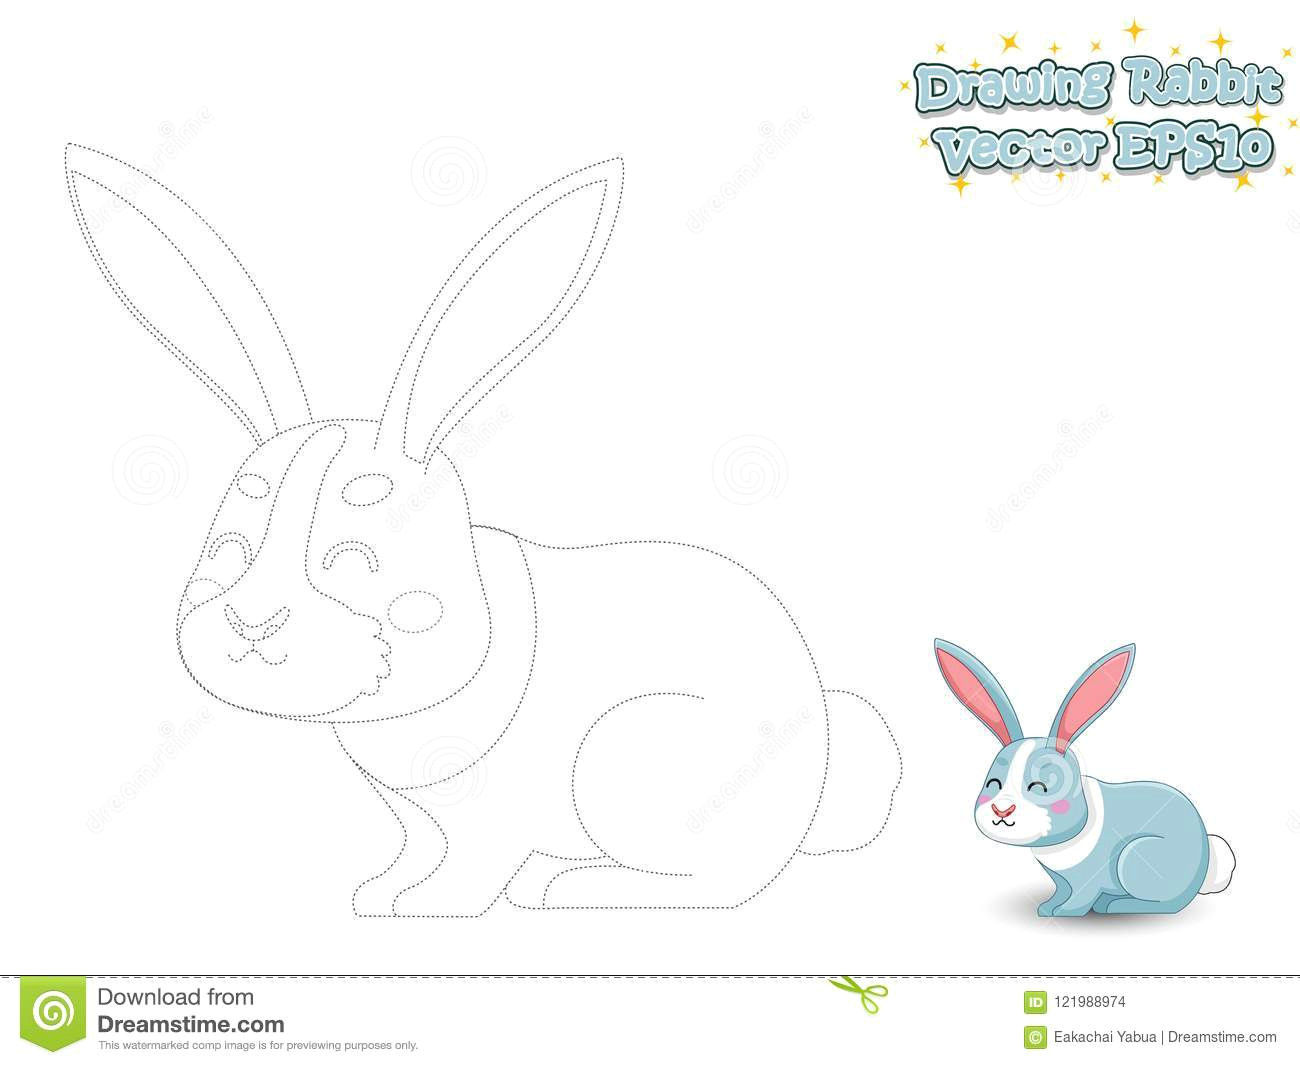 Drawing Cartoons for Beginners Book Drawing and Paint Cute Cartoon Rabbit Educational Game for Kids